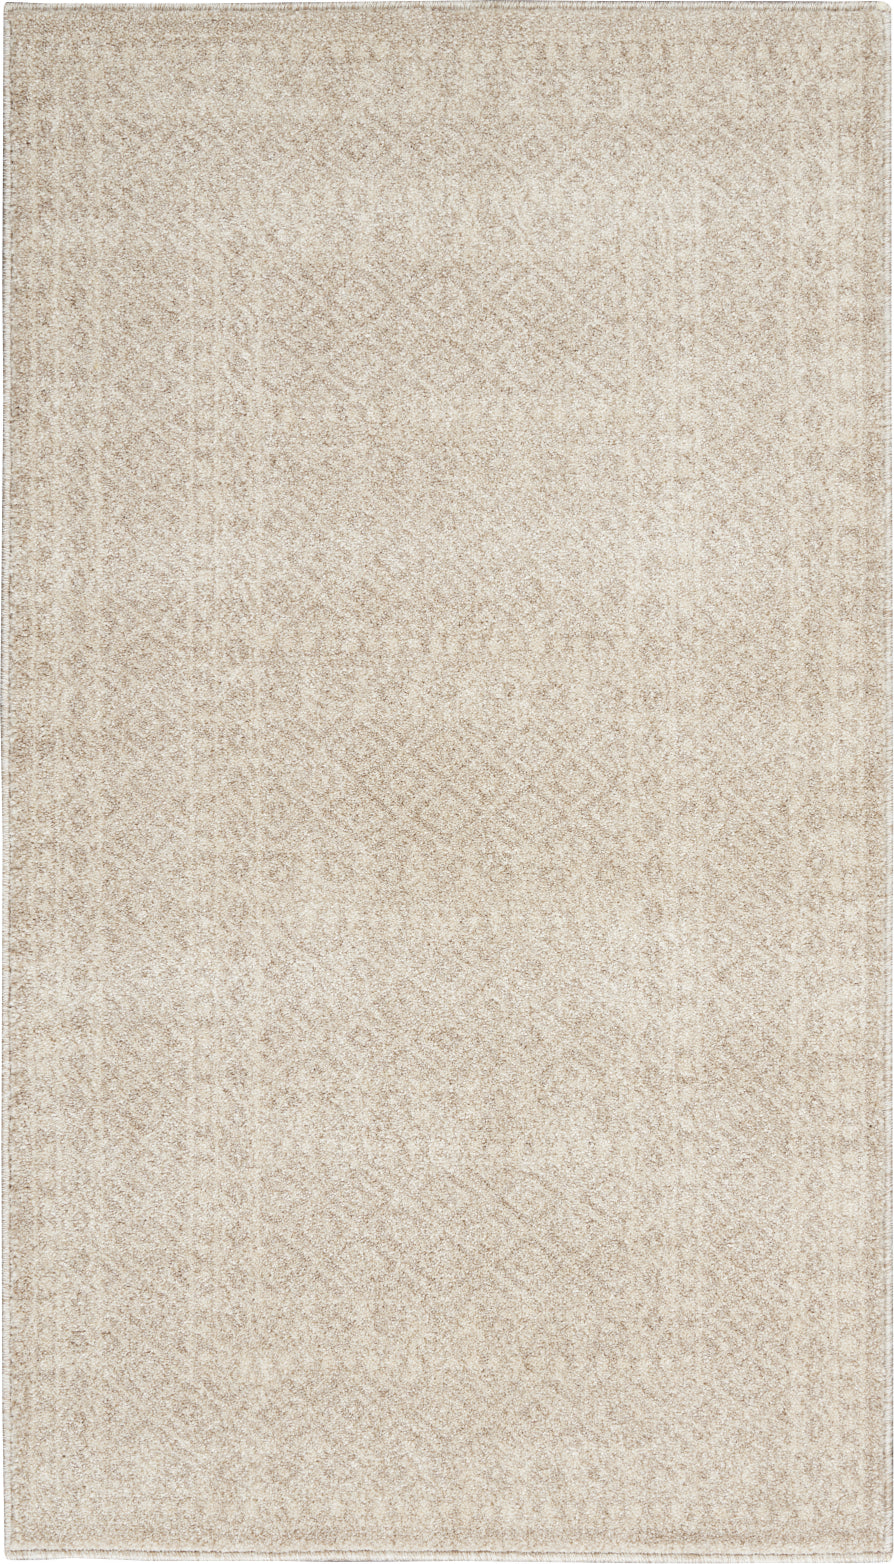 Royal Moroccan RYM04 Beige Area Rug by Nourison main image